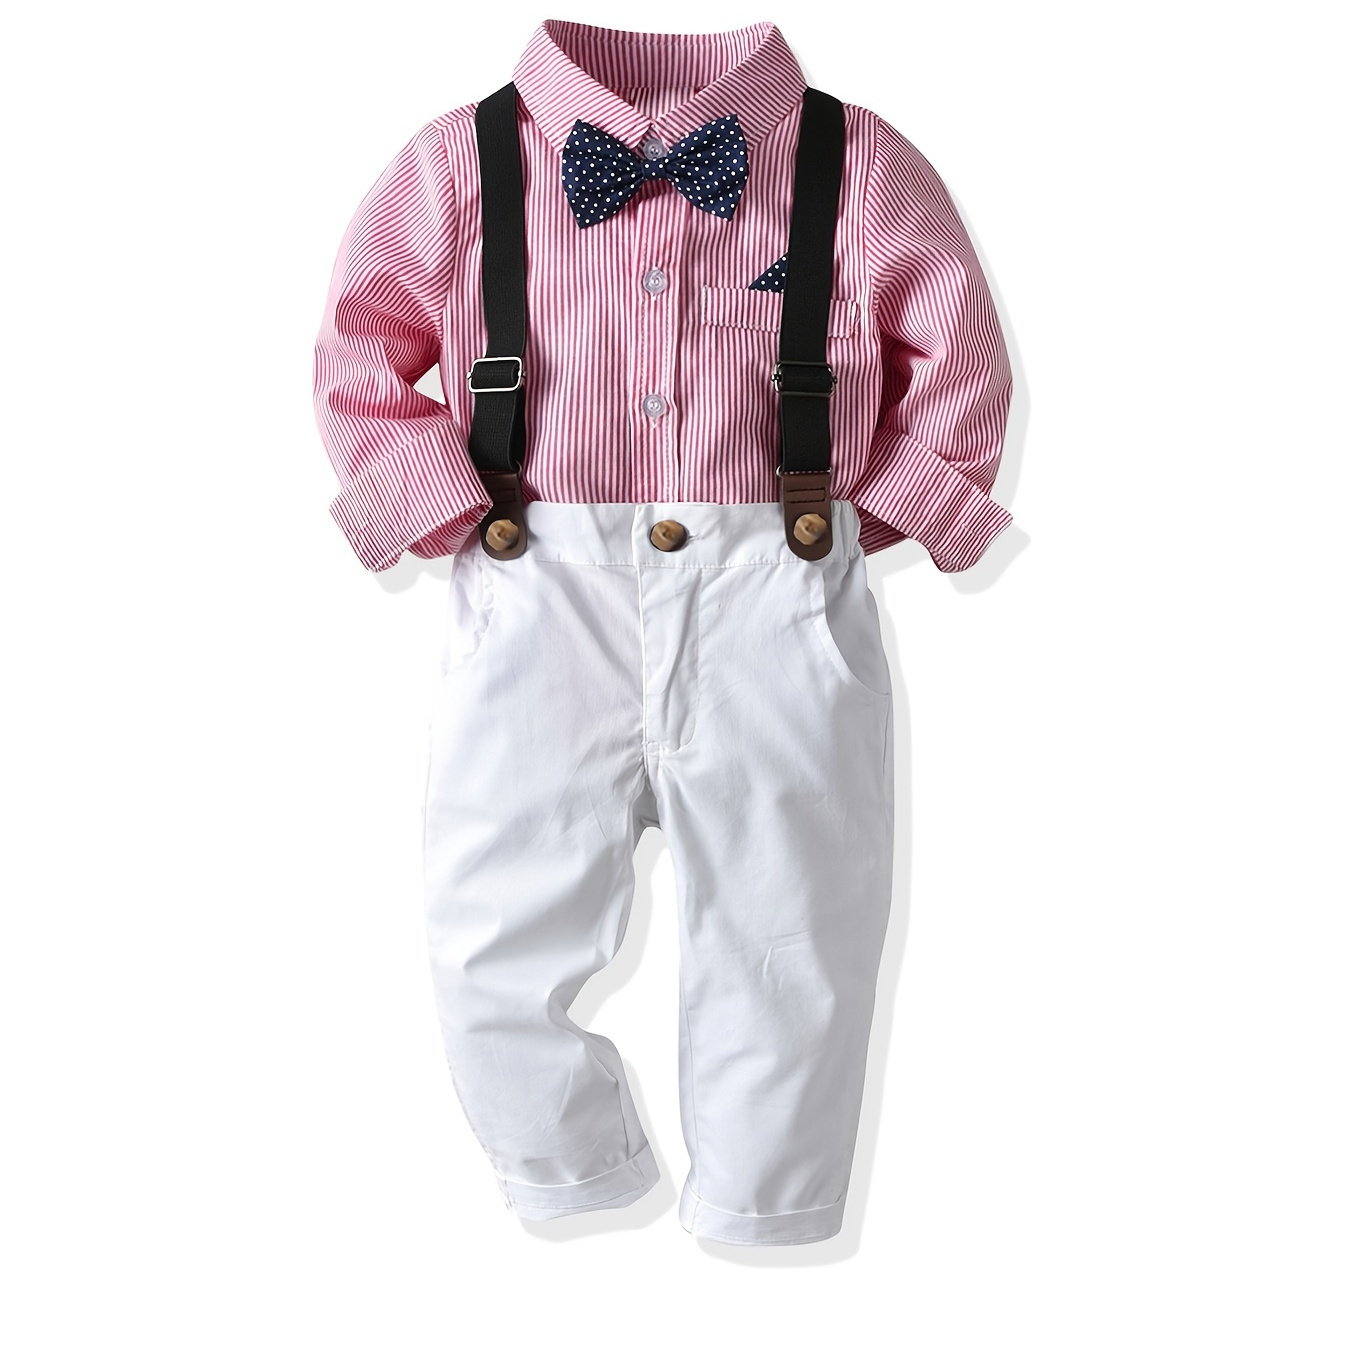 

Boys Formal Outfit Toddler Boys Gentleman Set Long Sleeves Bowtie Shirt+suspender Pants Baby Kids Clothes